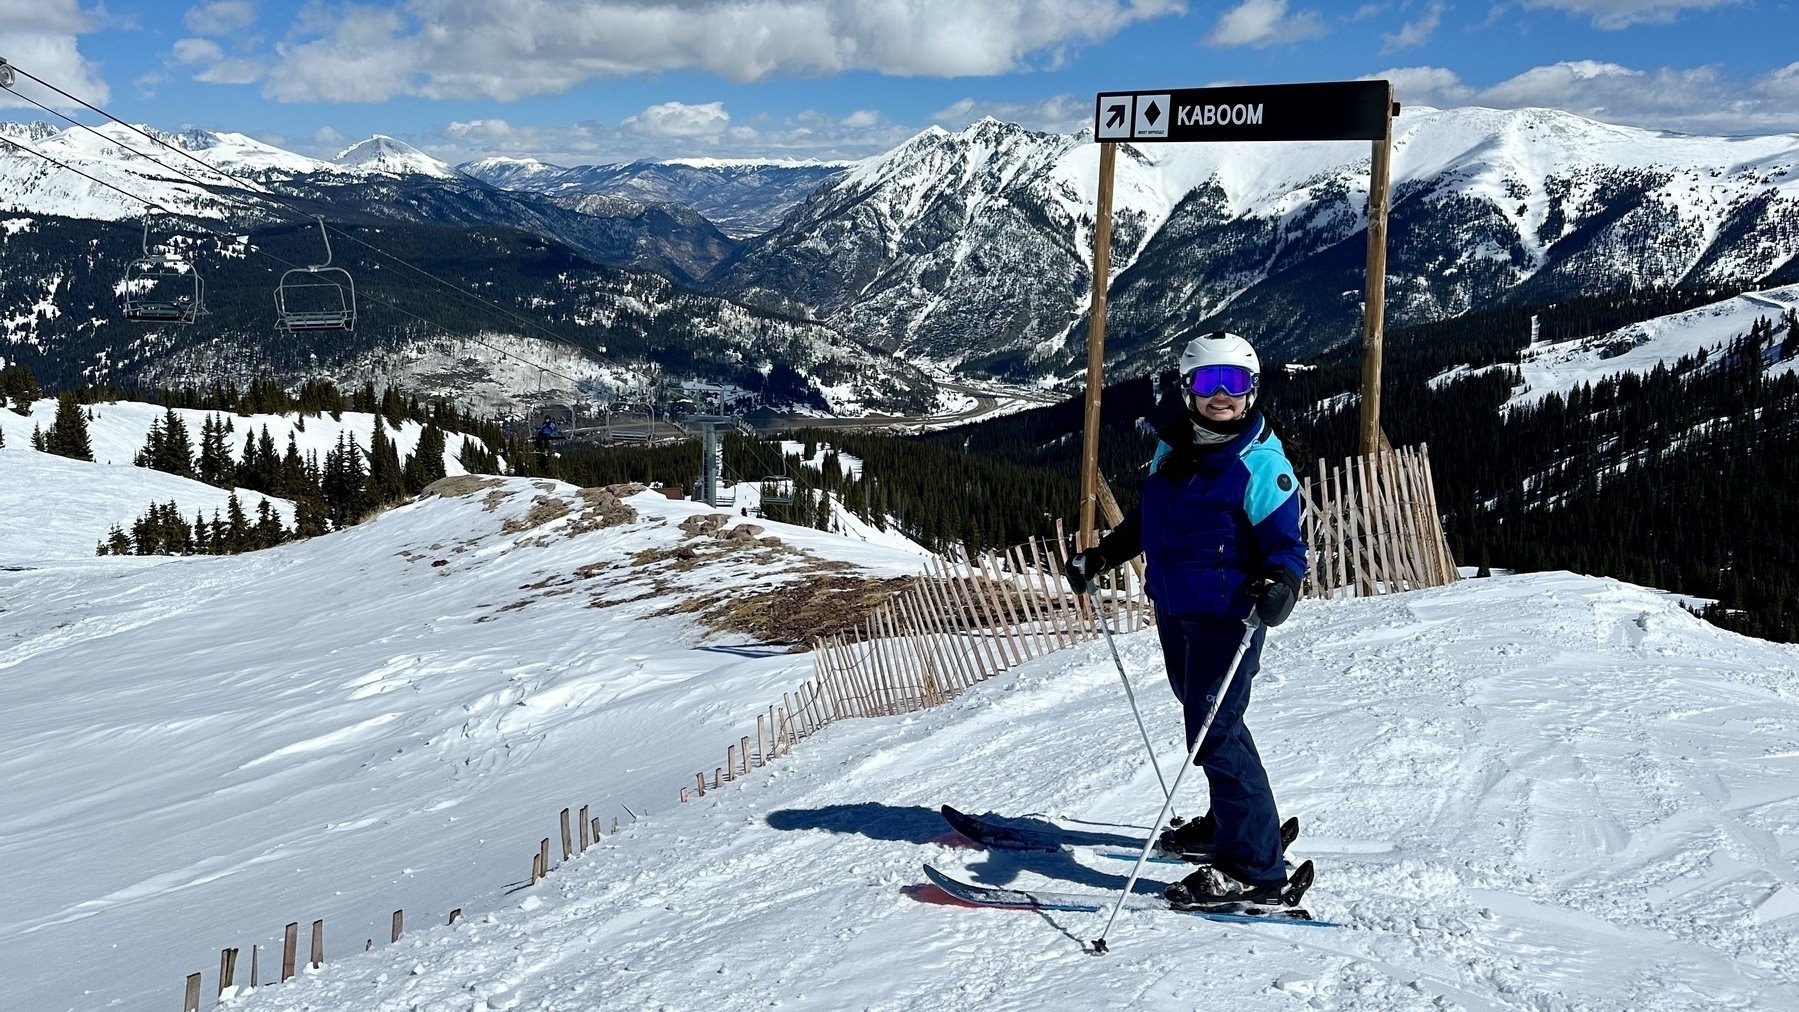 Meera on skis on top of Copper Mountain in front of the sign for the KABOOM black diamond run.